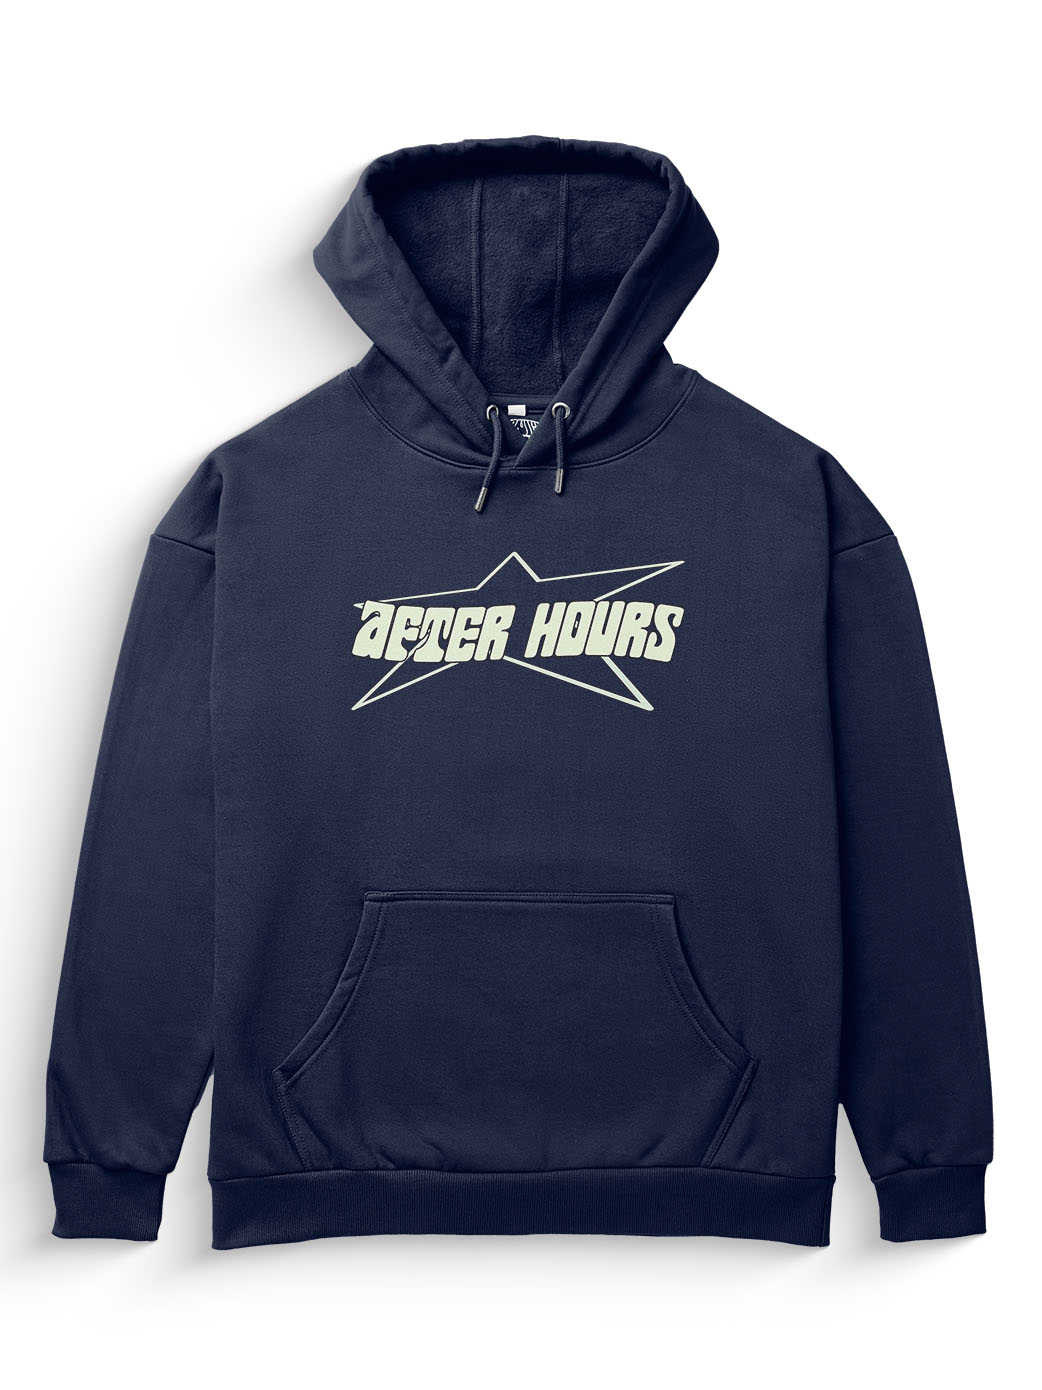 After Hours Hoodie - SALE